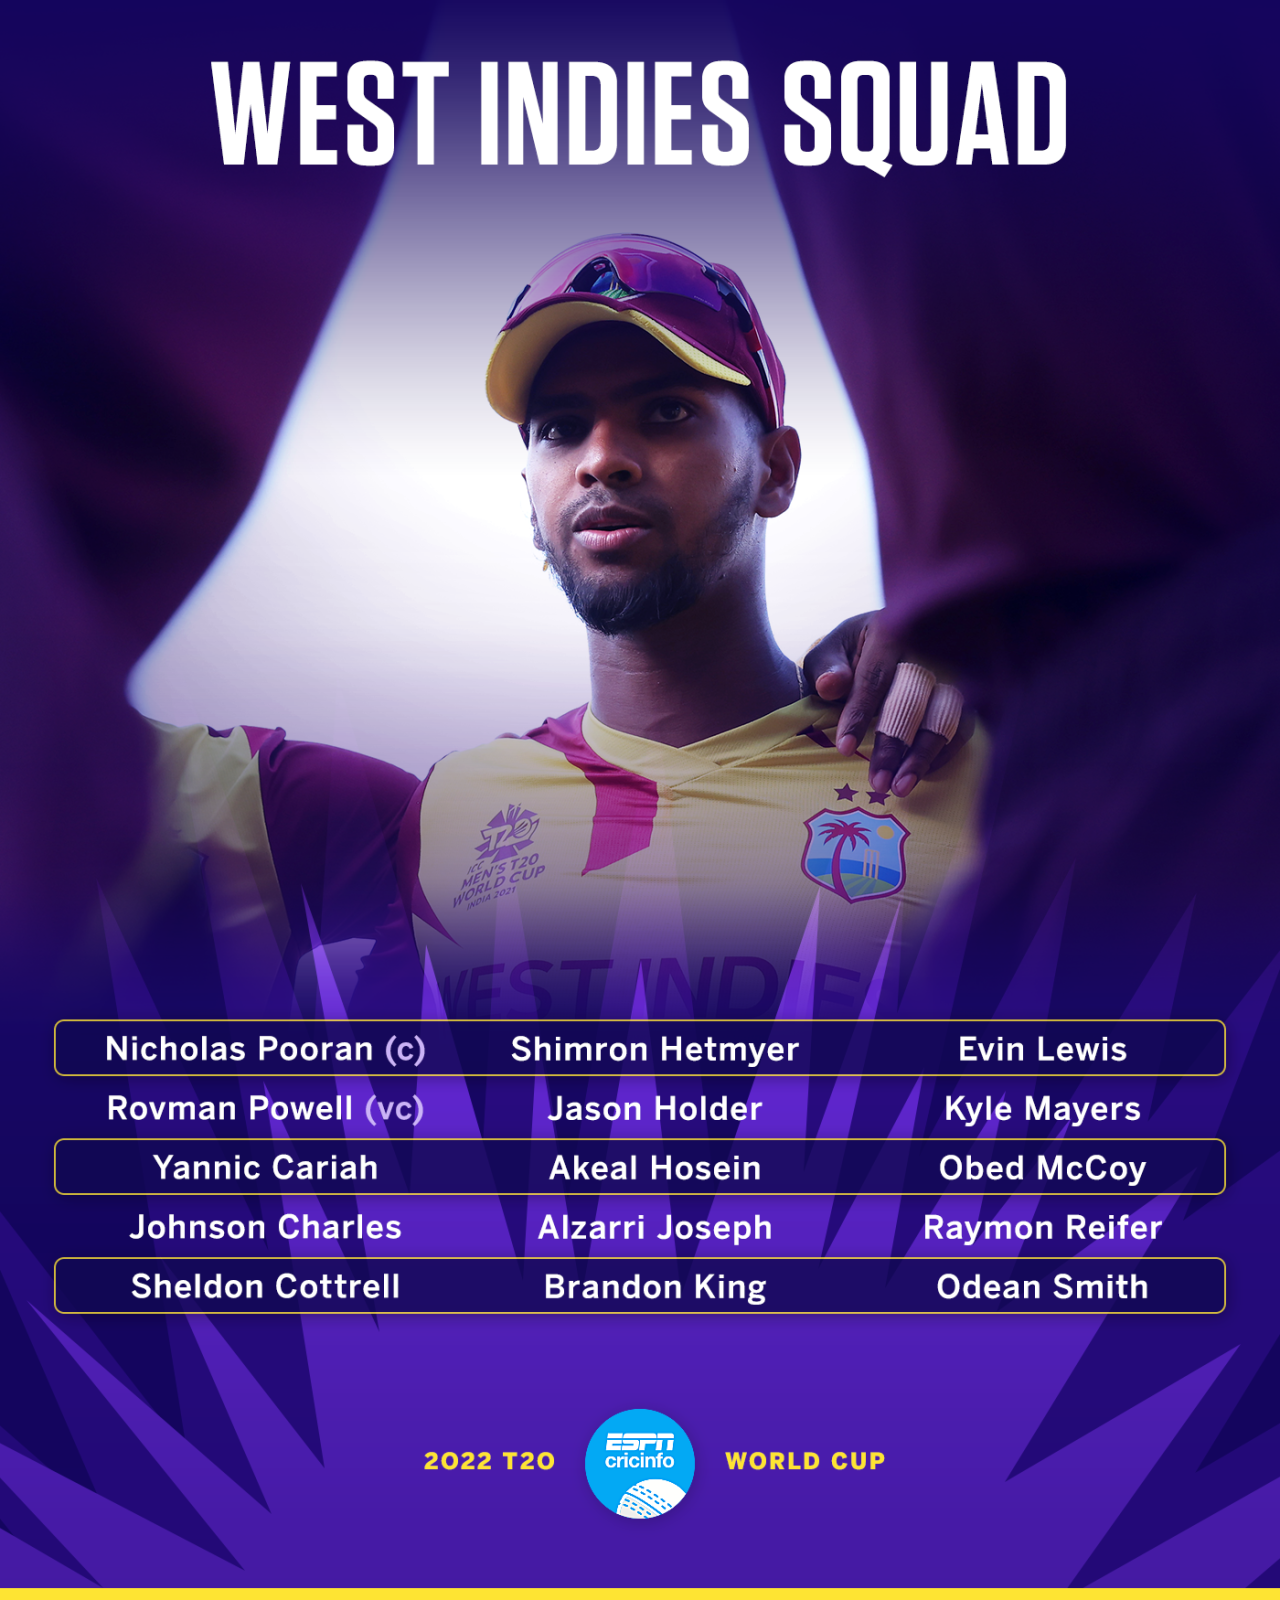 The 15-man squad to represent West Indies at the 2022 T20 World Cup